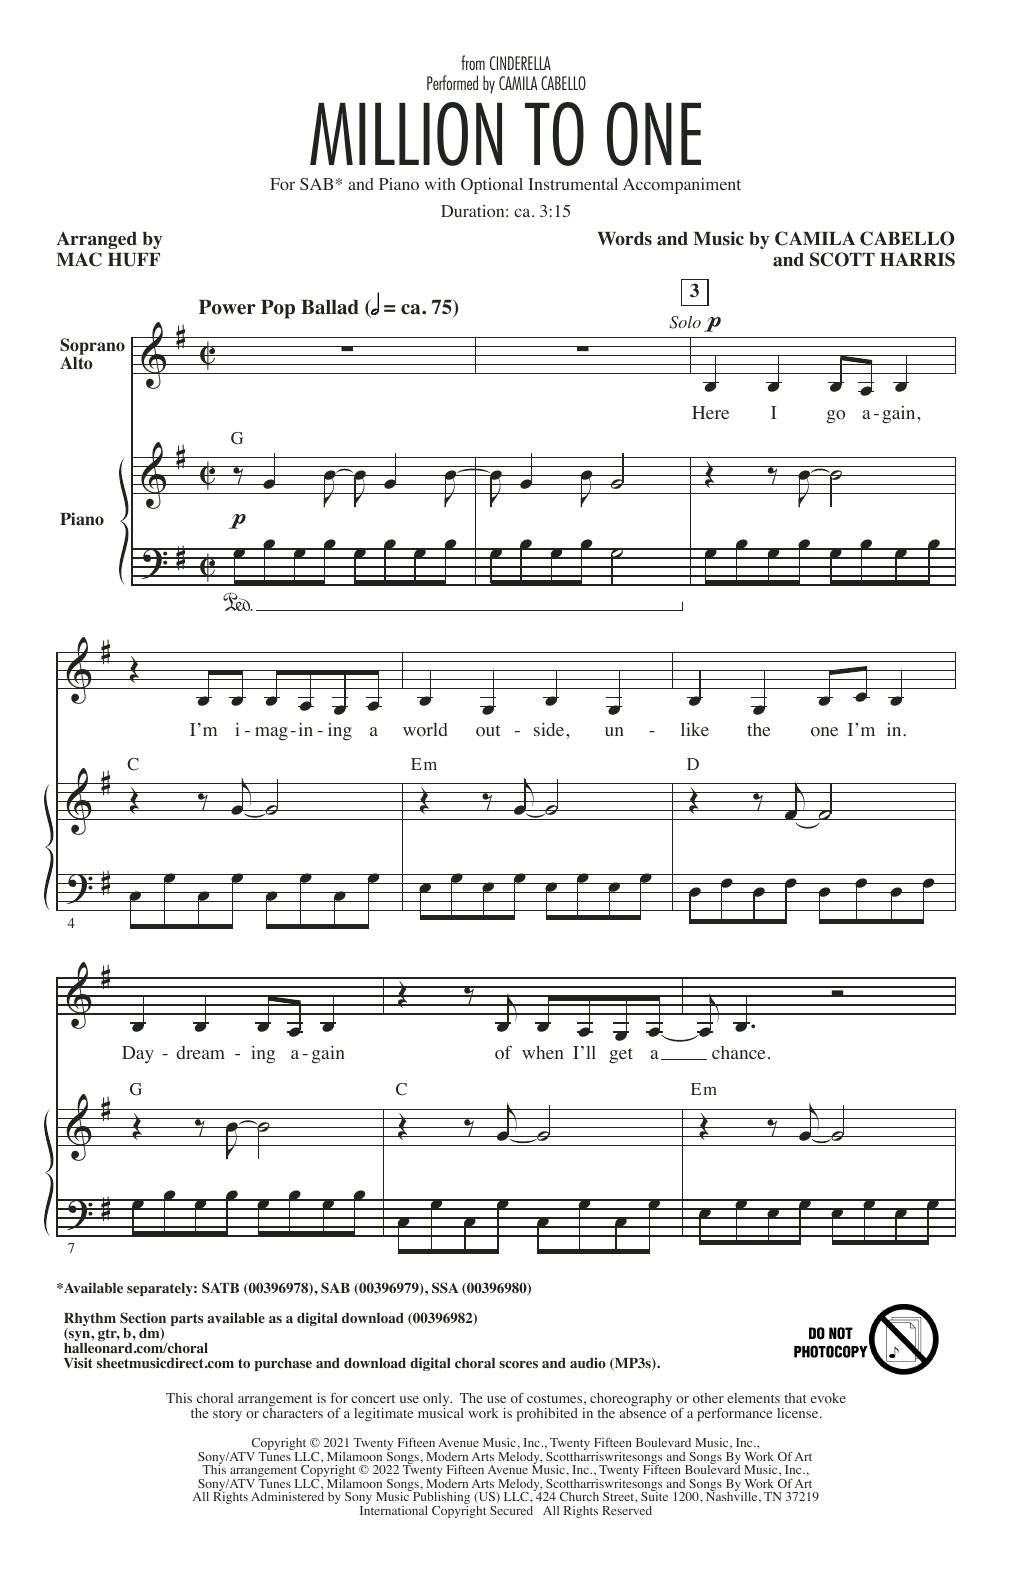 Download Camila Cabello Million To One (from the Amazon Origina Sheet Music